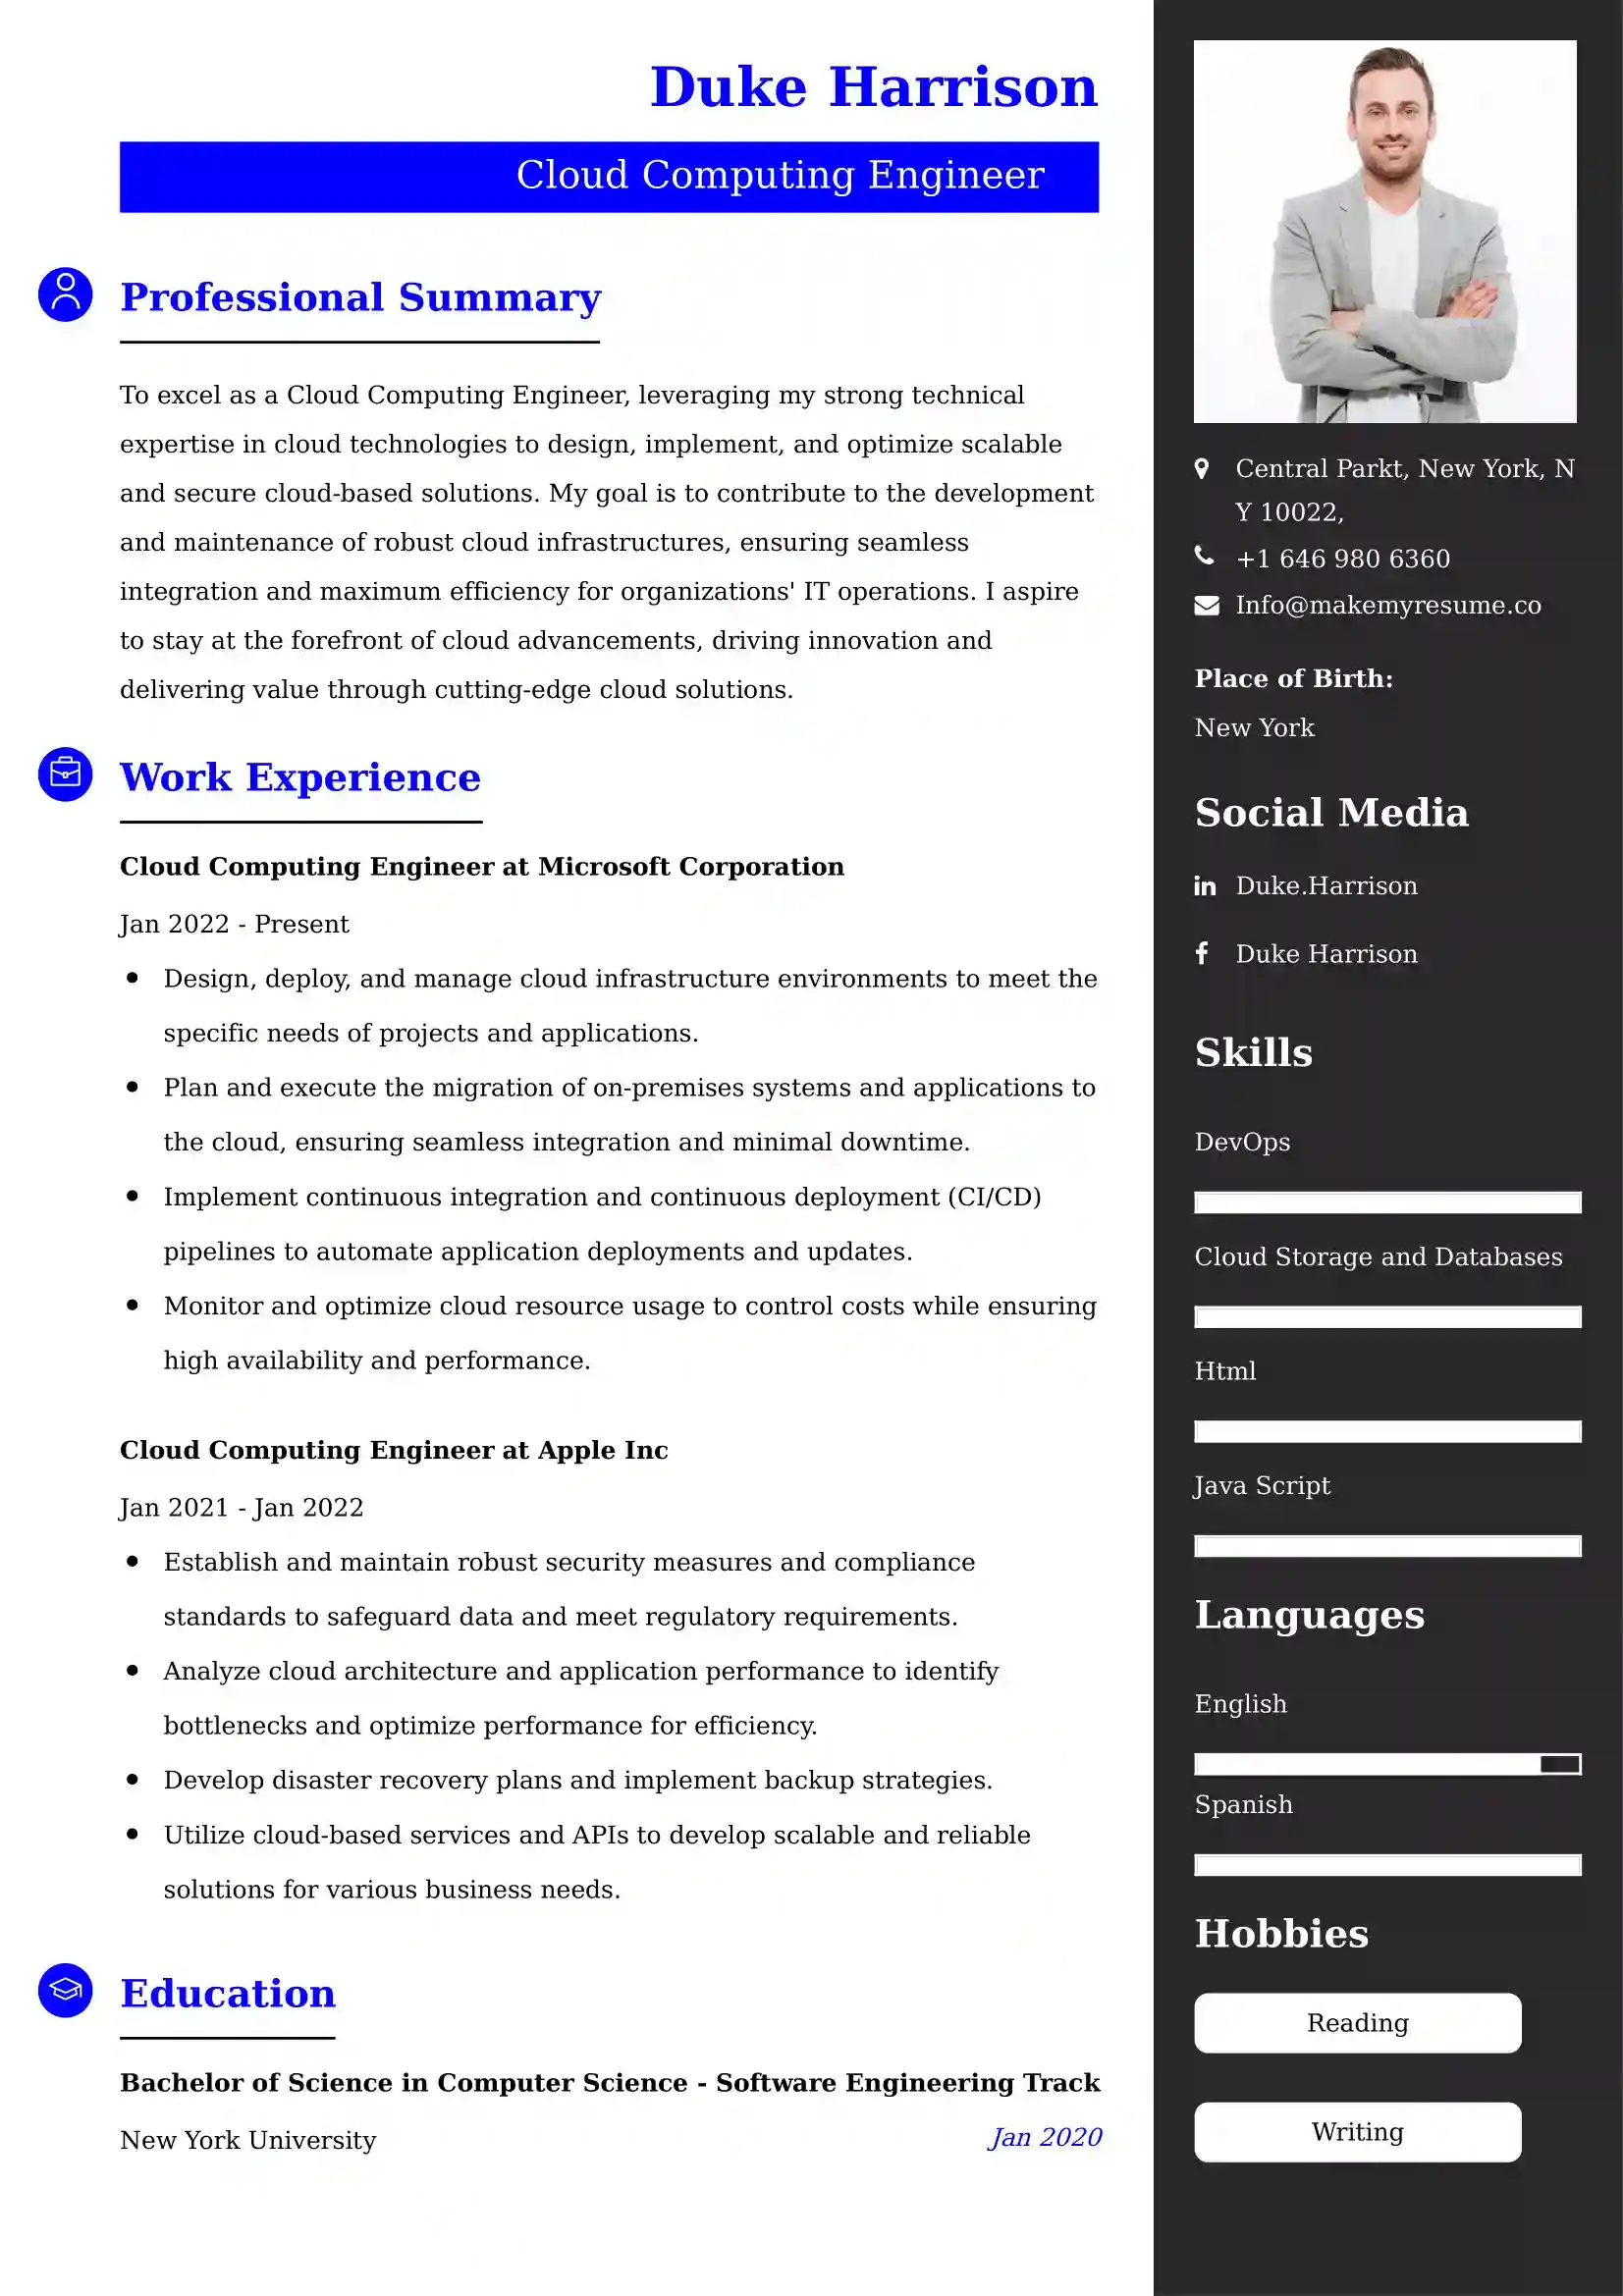 42+ Professional Computers & Software Resume Examples, Latest CV Format